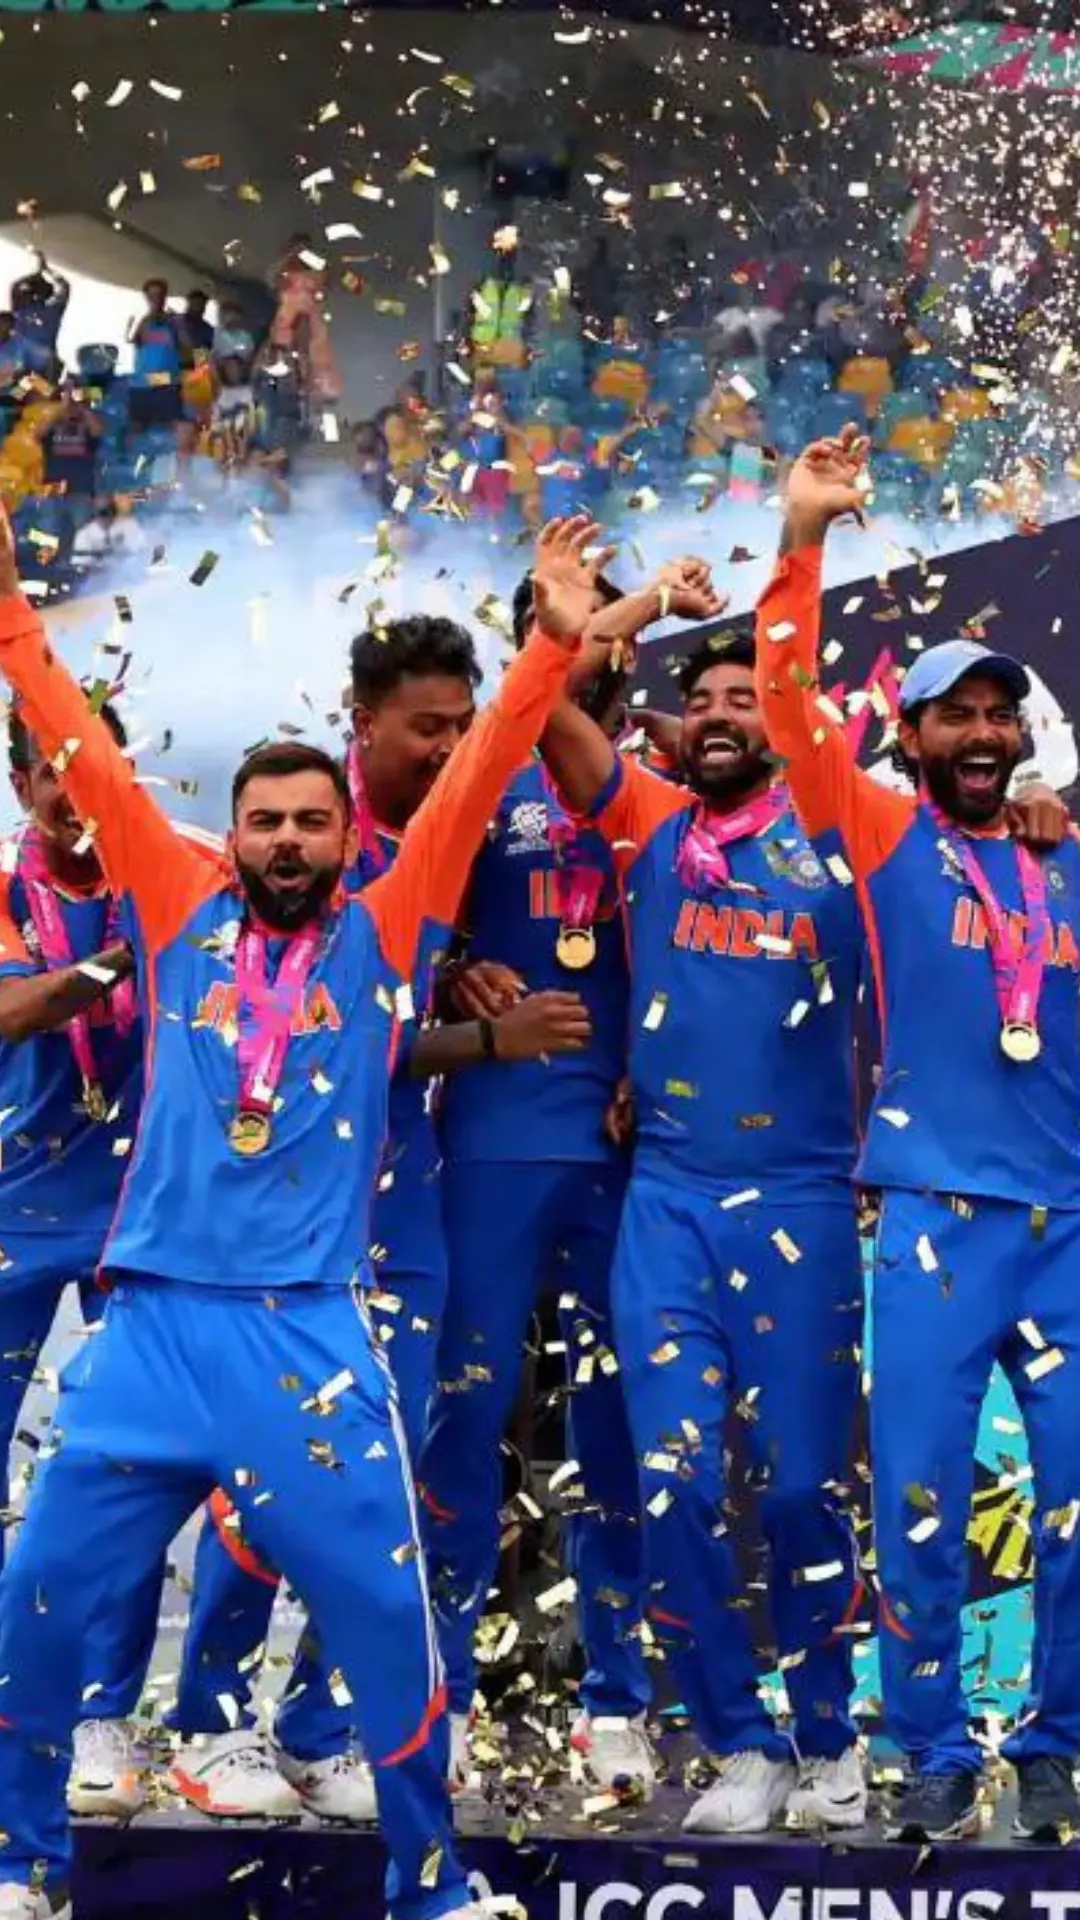 India Clinches T20 World Cup After 11-Year Wait; Emotional Farewells for Kohli and Rohit